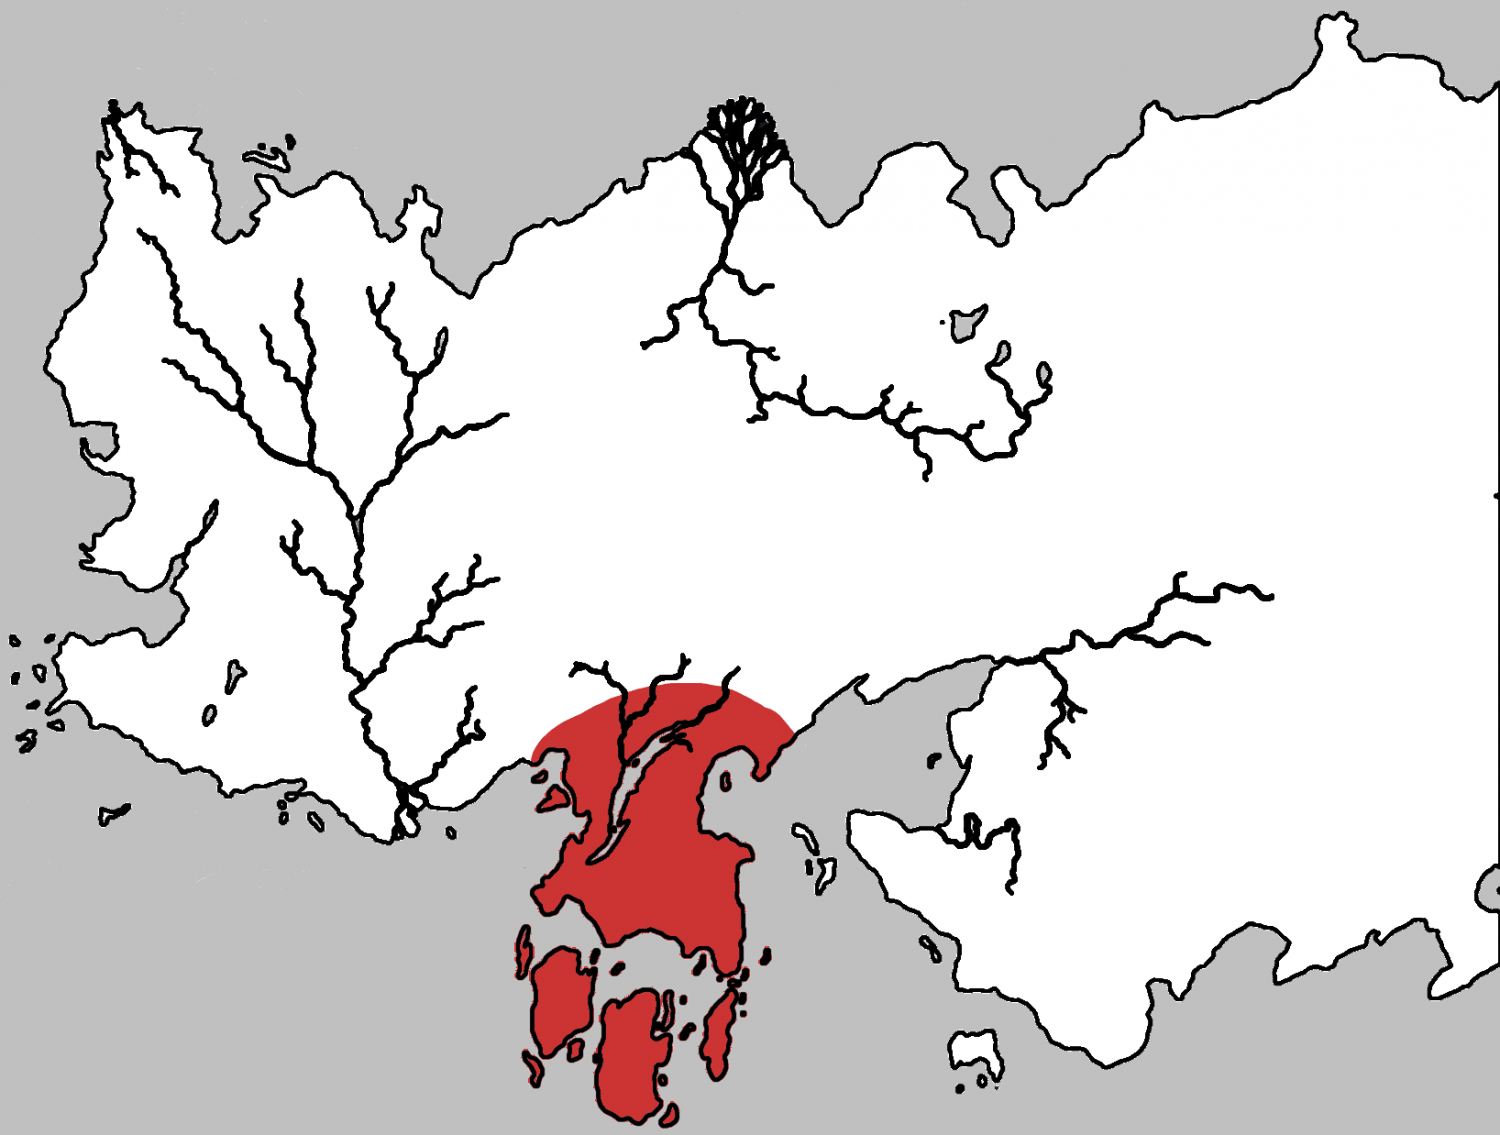 Valyrian peninsula - A Wiki of Ice and Fire